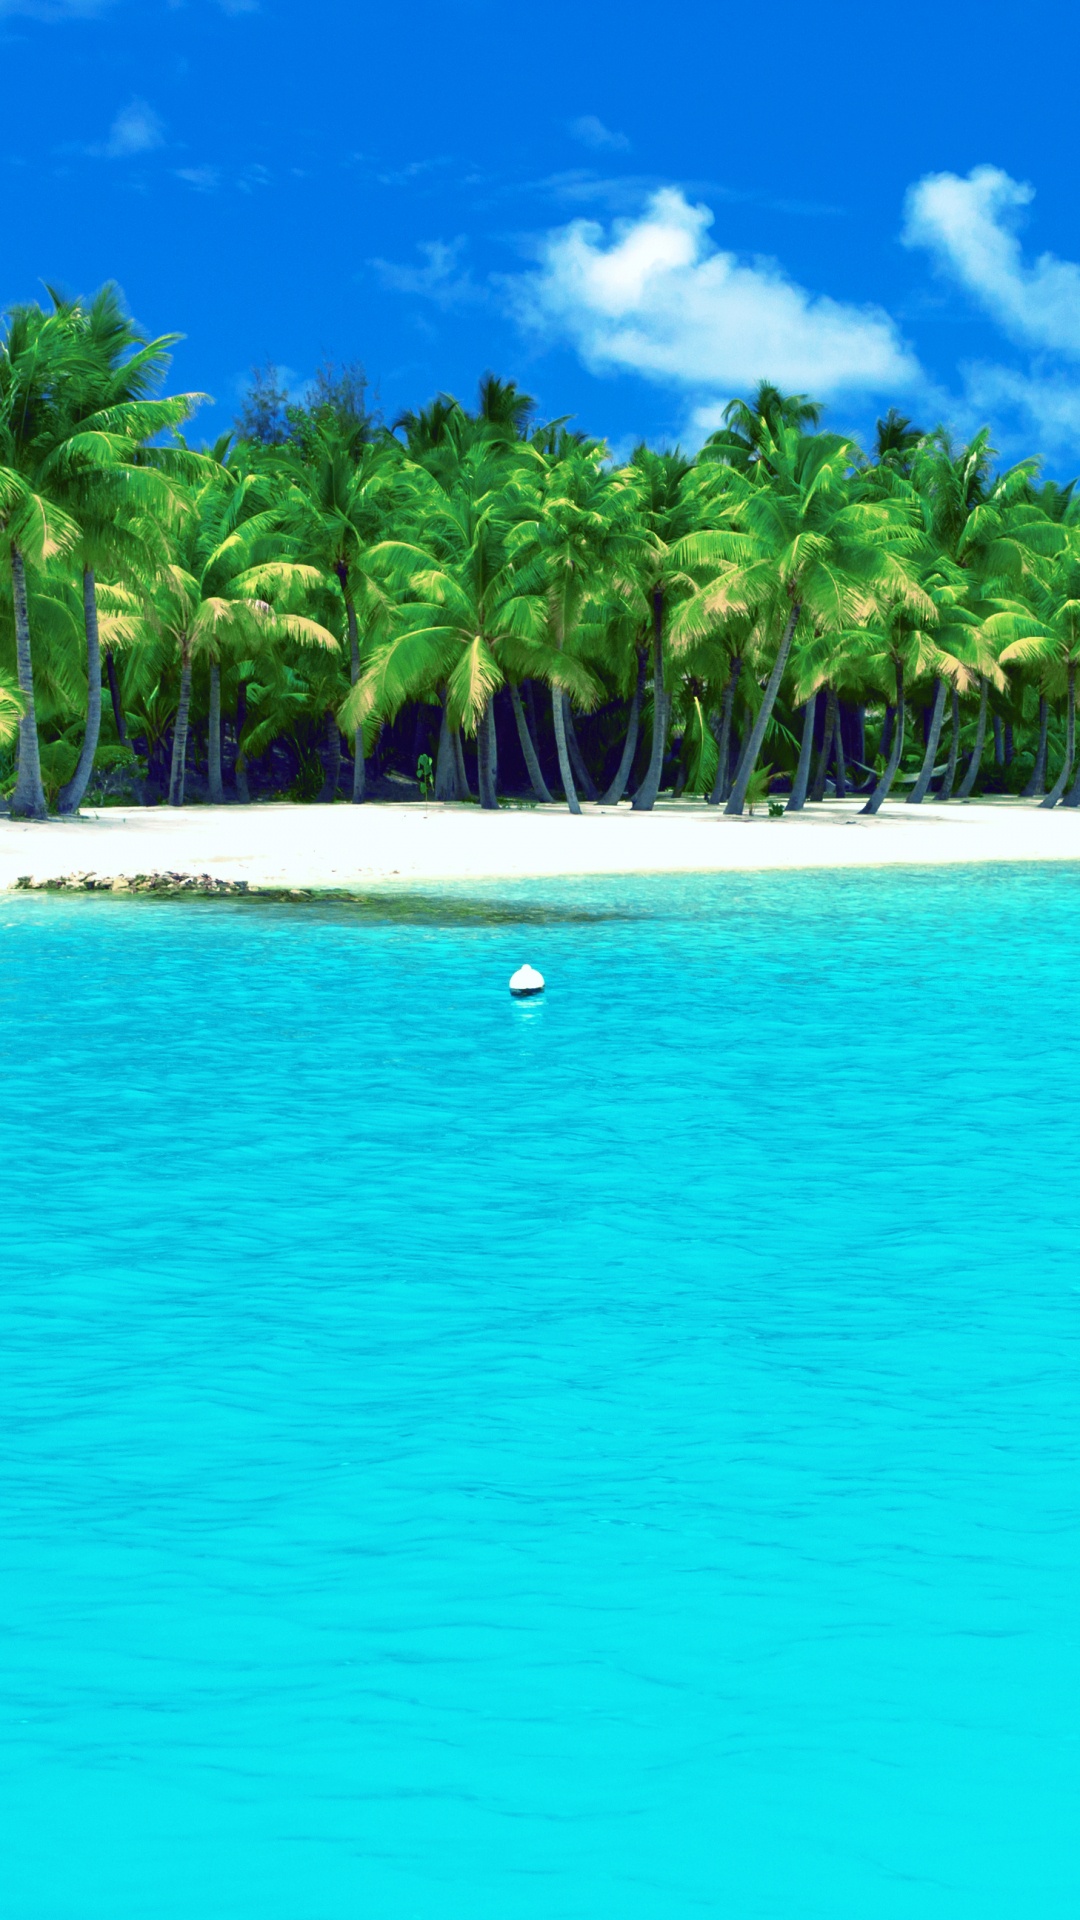 White Sand Beach With Palm Trees on The Side. Wallpaper in 1080x1920 Resolution